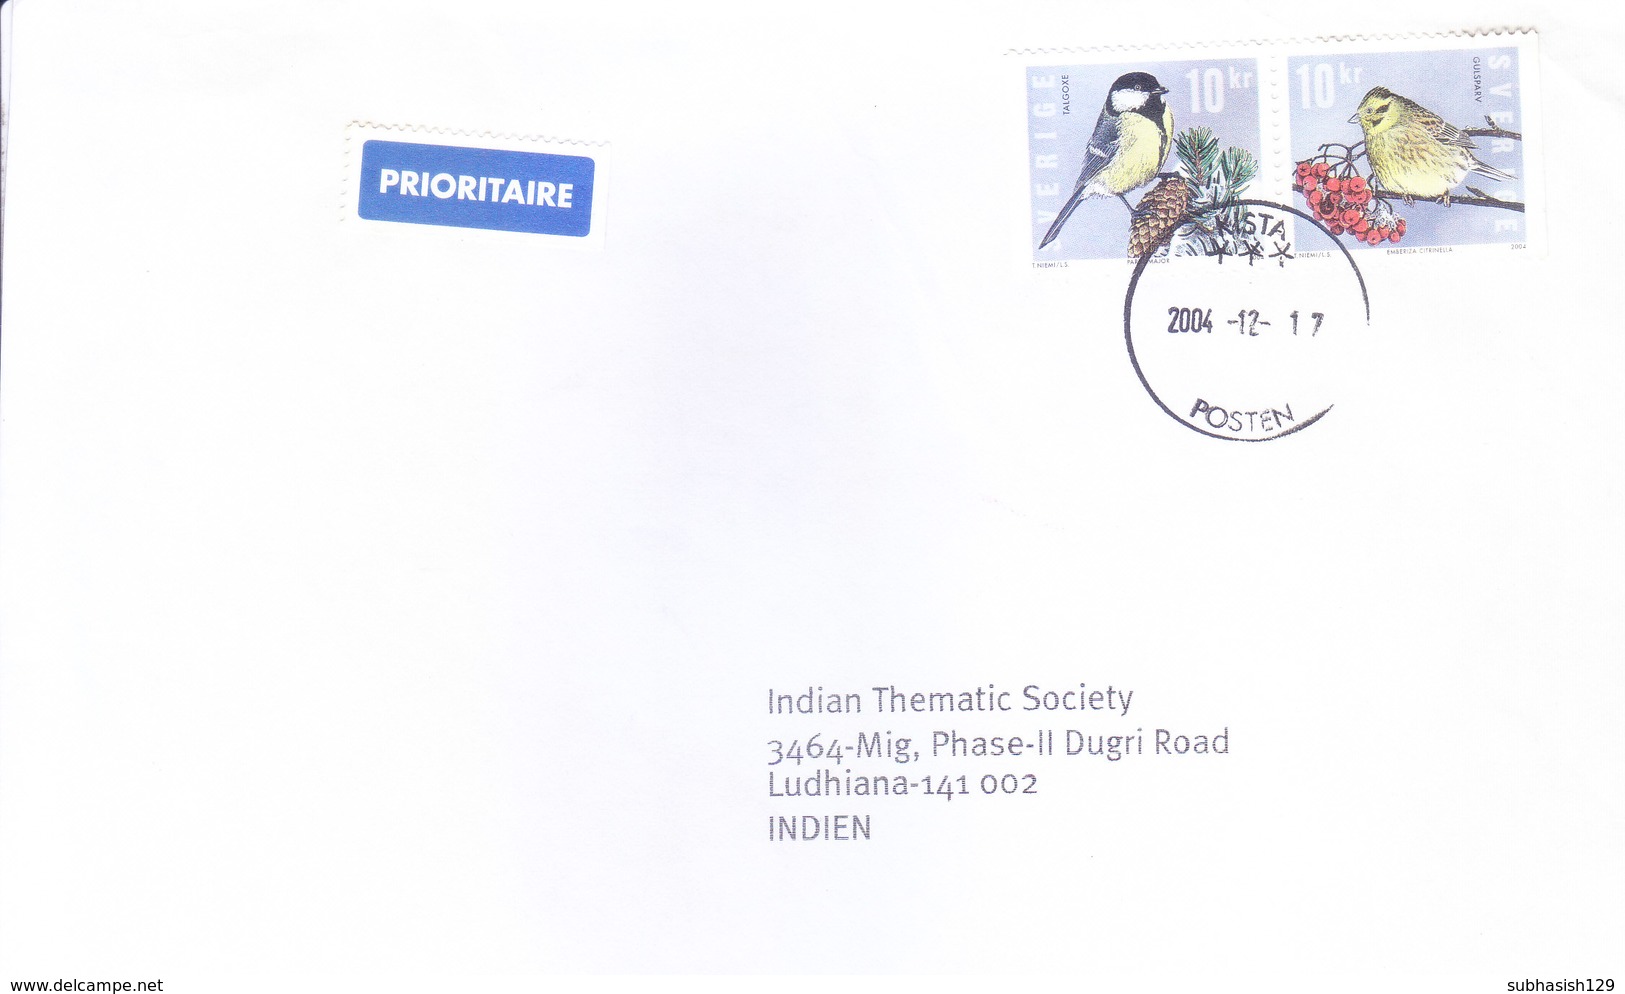 SWEDEN 2004 COMMERCIAL COVER POSTED FROM KISTA FOR INDIA - 2V STRIP OF BIRD STAMP - Storia Postale